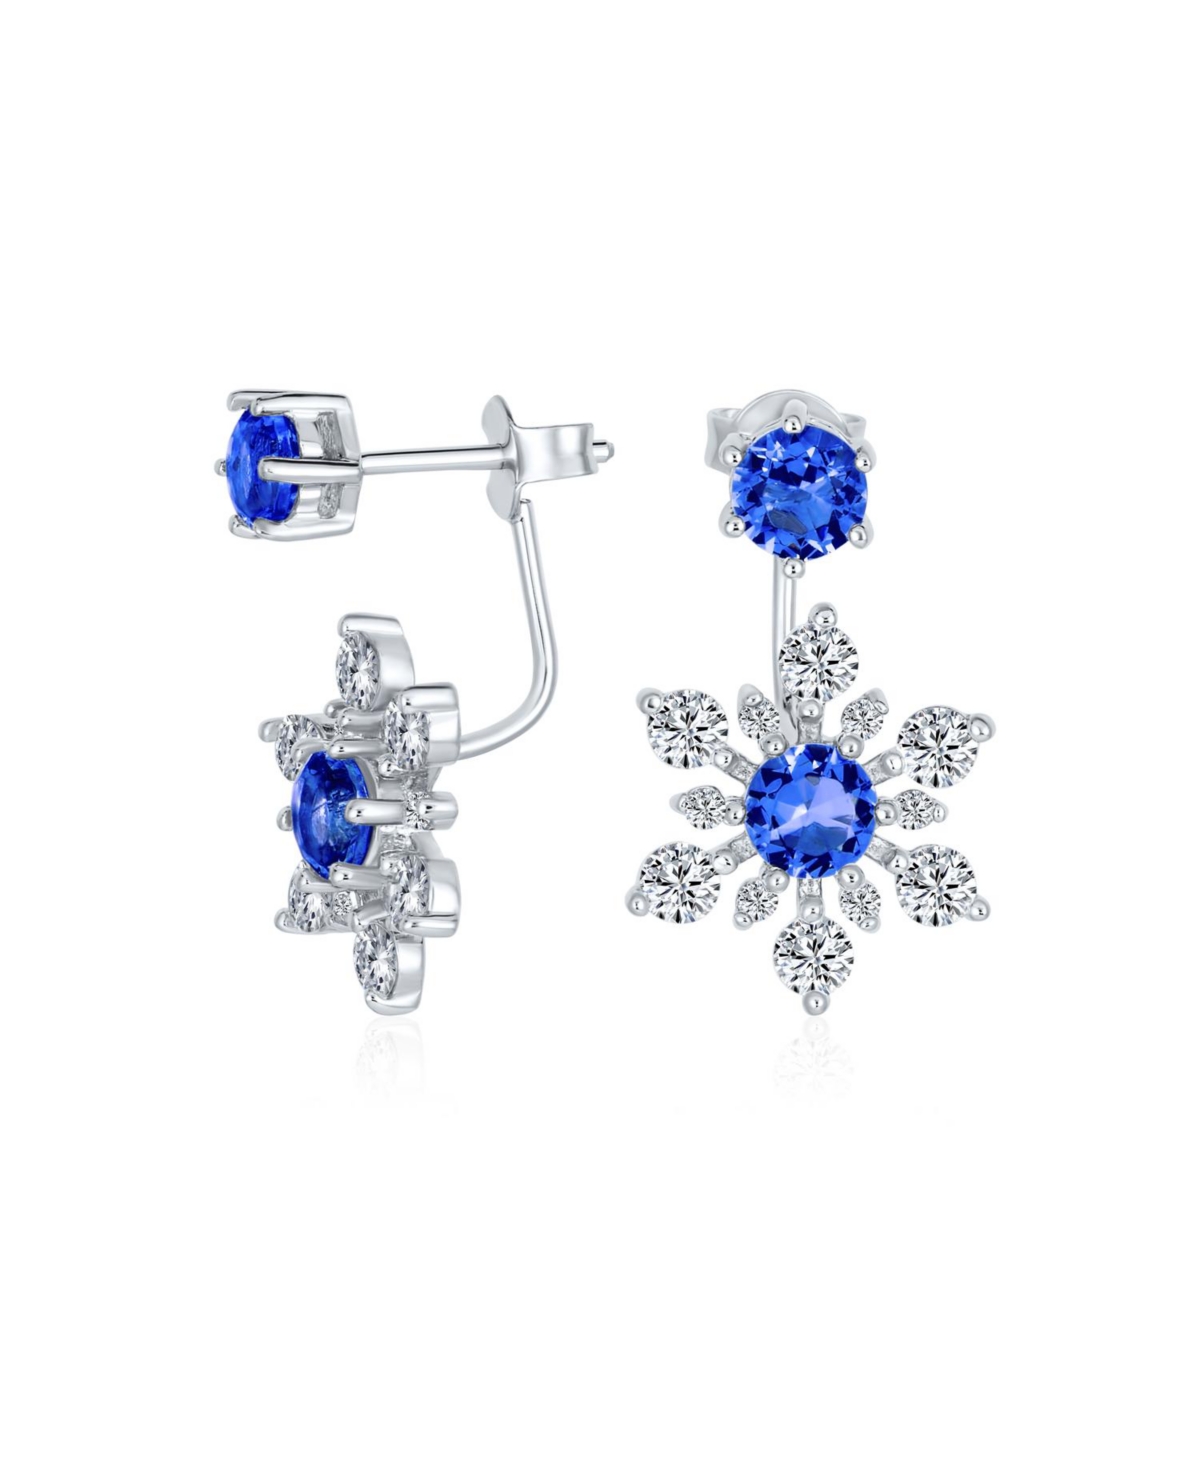 Holiday Party Winter Christmas Blue Cz 2 In 1 Ear Jackets Back Front Snowflake Stud Earrings .925 Sterling Silver - Dark blue